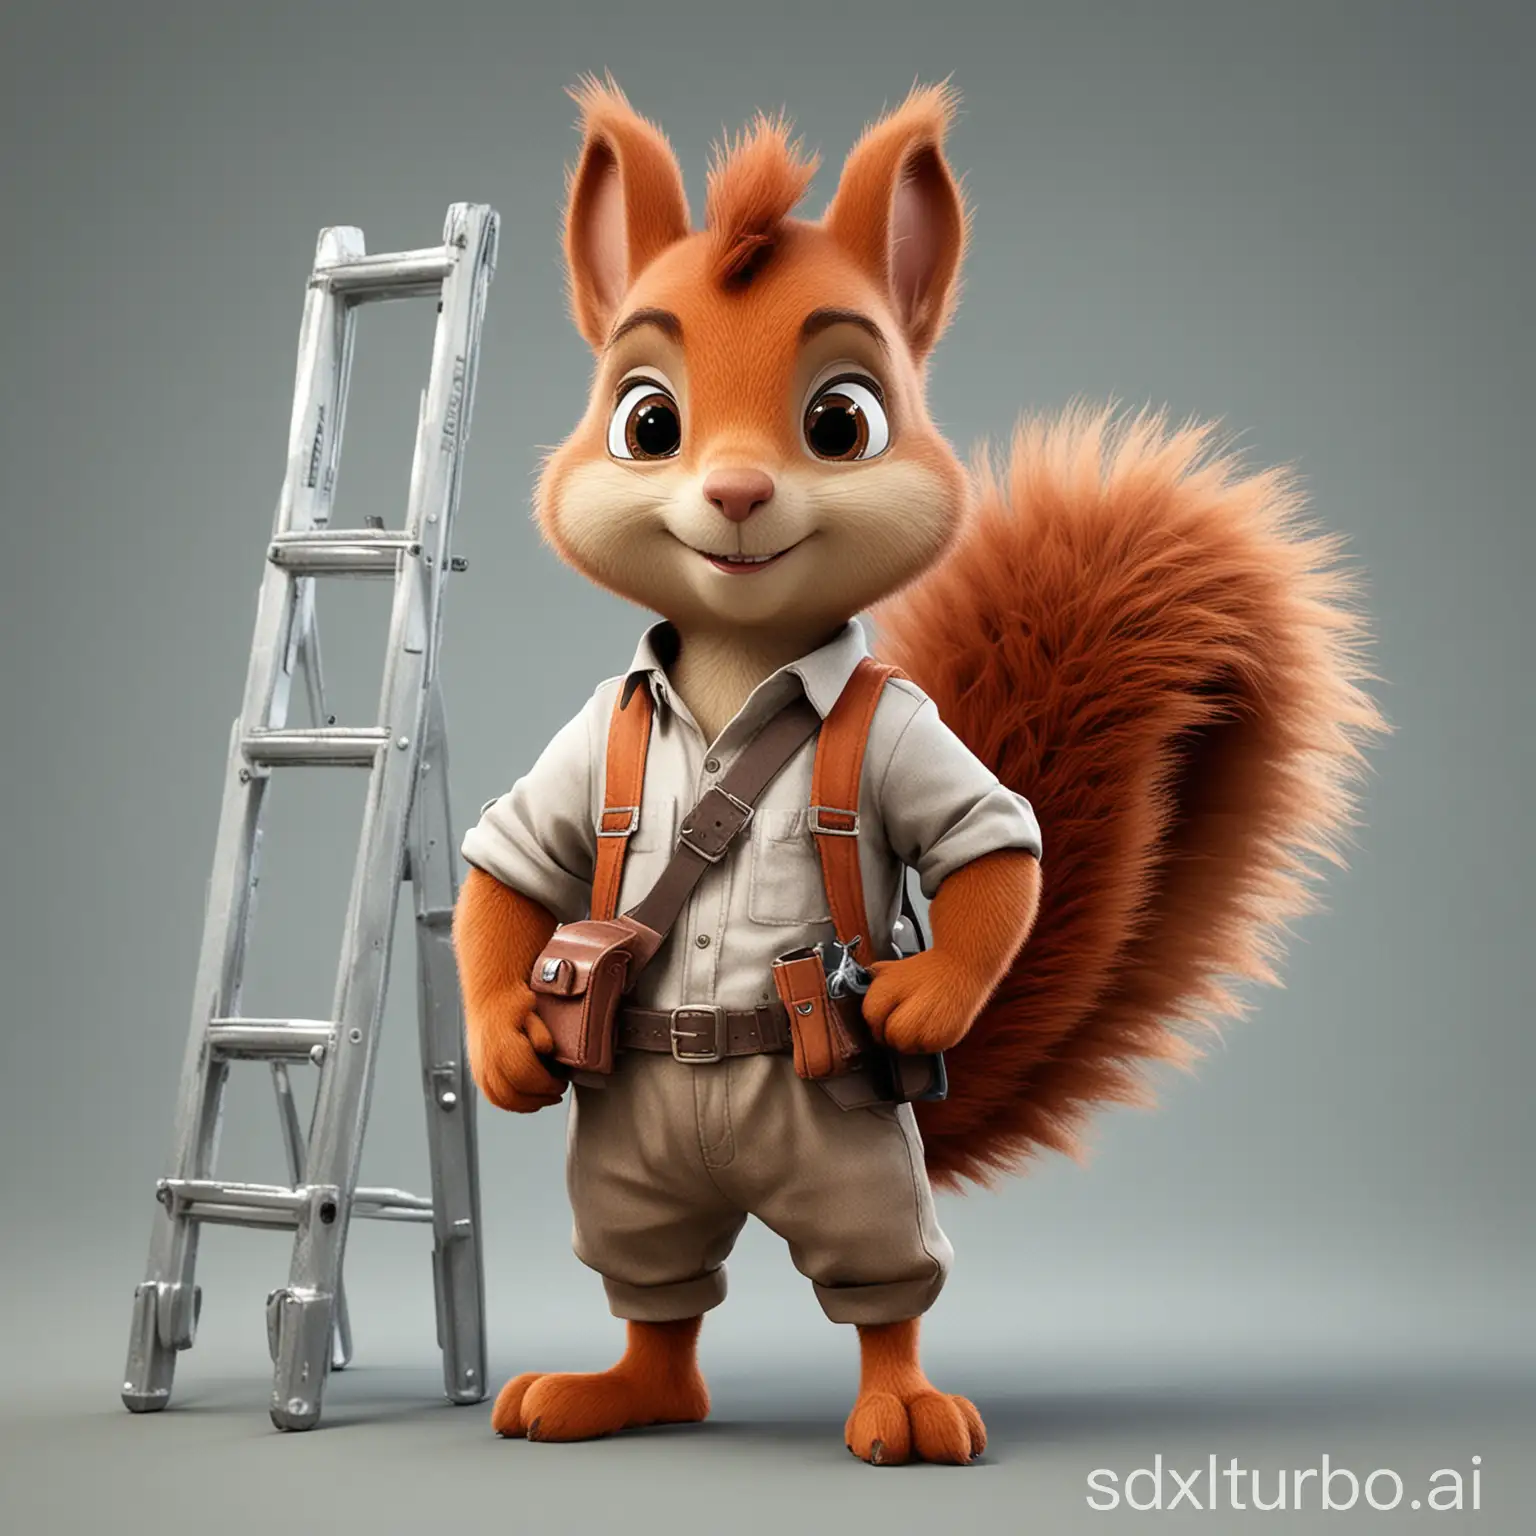 Friendly-Squirrel-Mascot-with-Scaffoldings-and-Tools